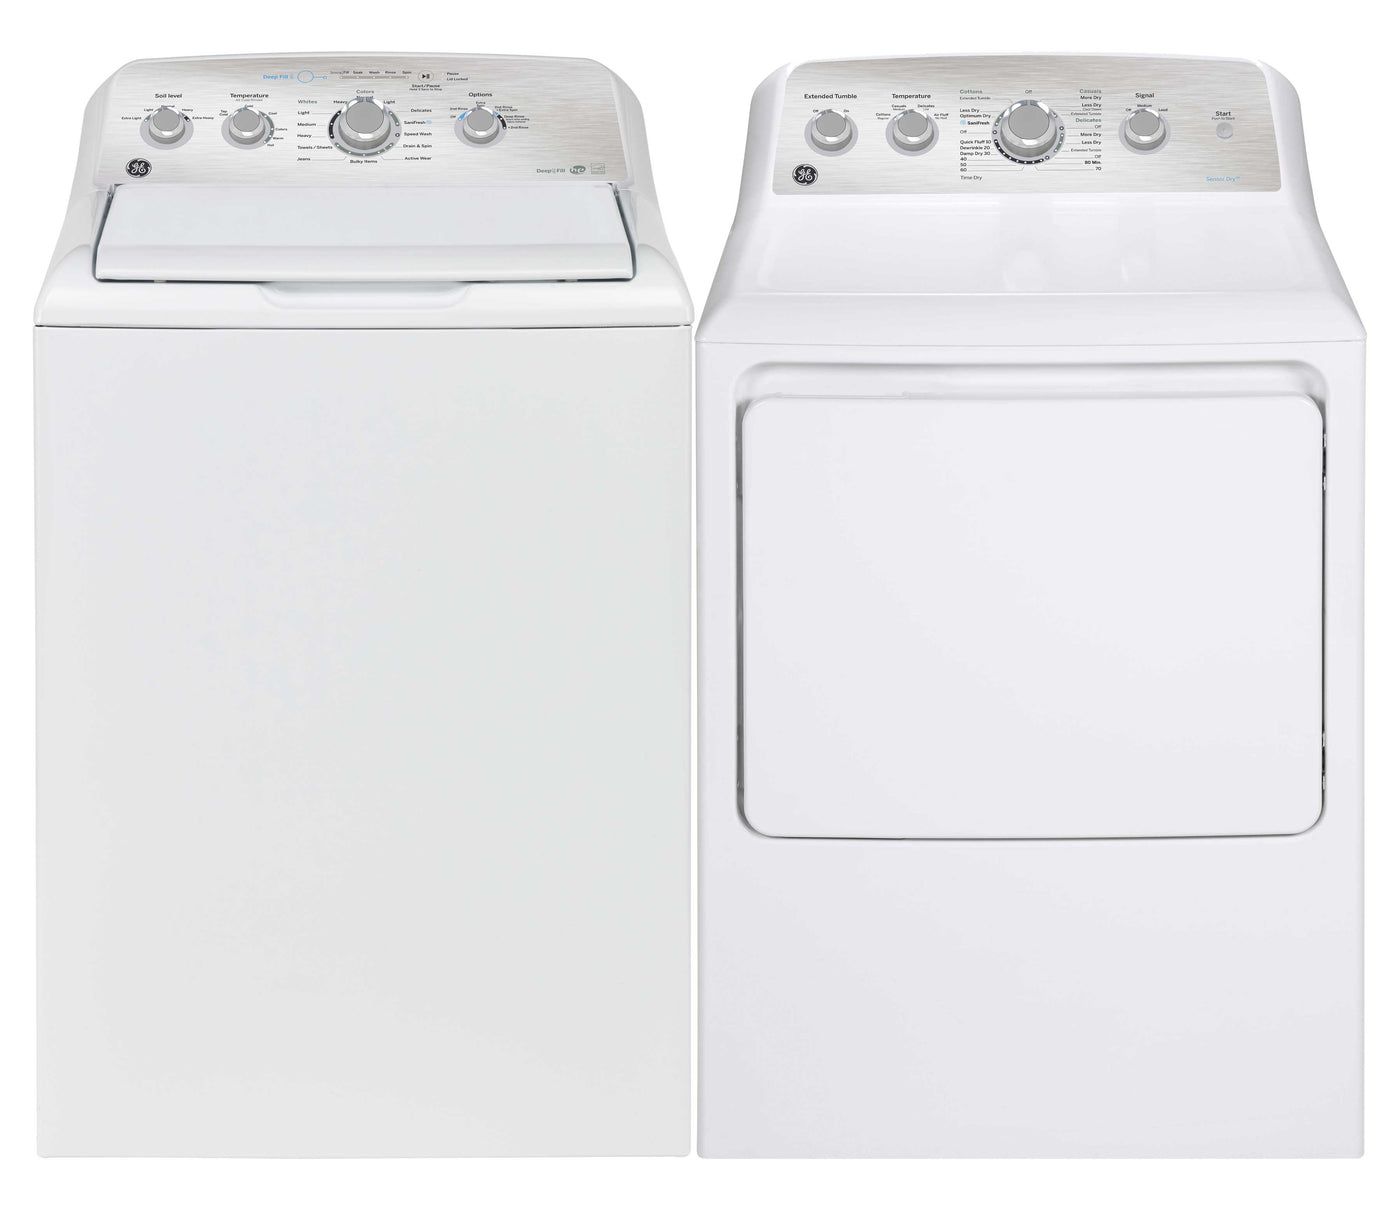 GE White Top-Load Washer (5.0 cu. ft.) & Electric Dryer (7.2 cu. ft.) - GTW550BMRWS/GTD45EBMRWS